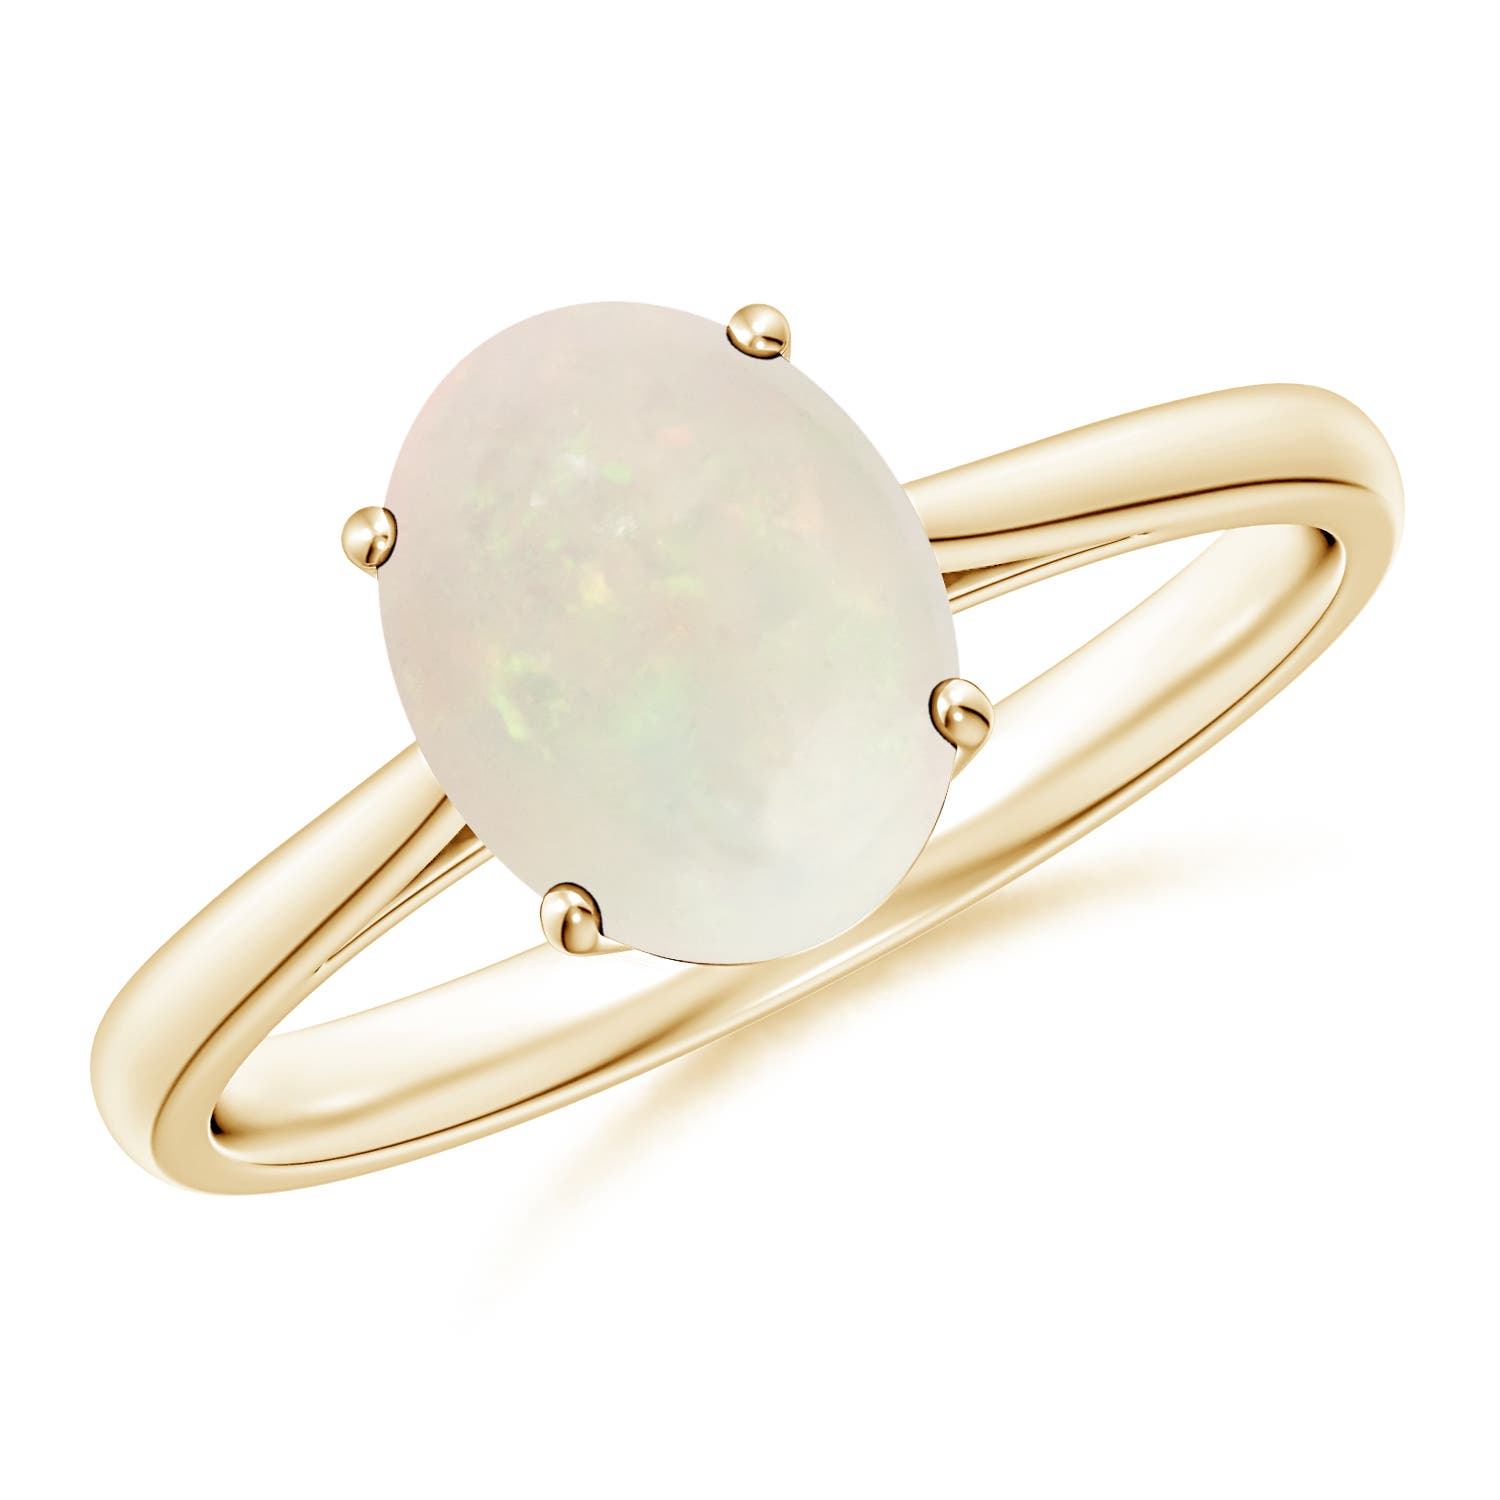 A - Opal / 1.1 CT / 14 KT Yellow Gold